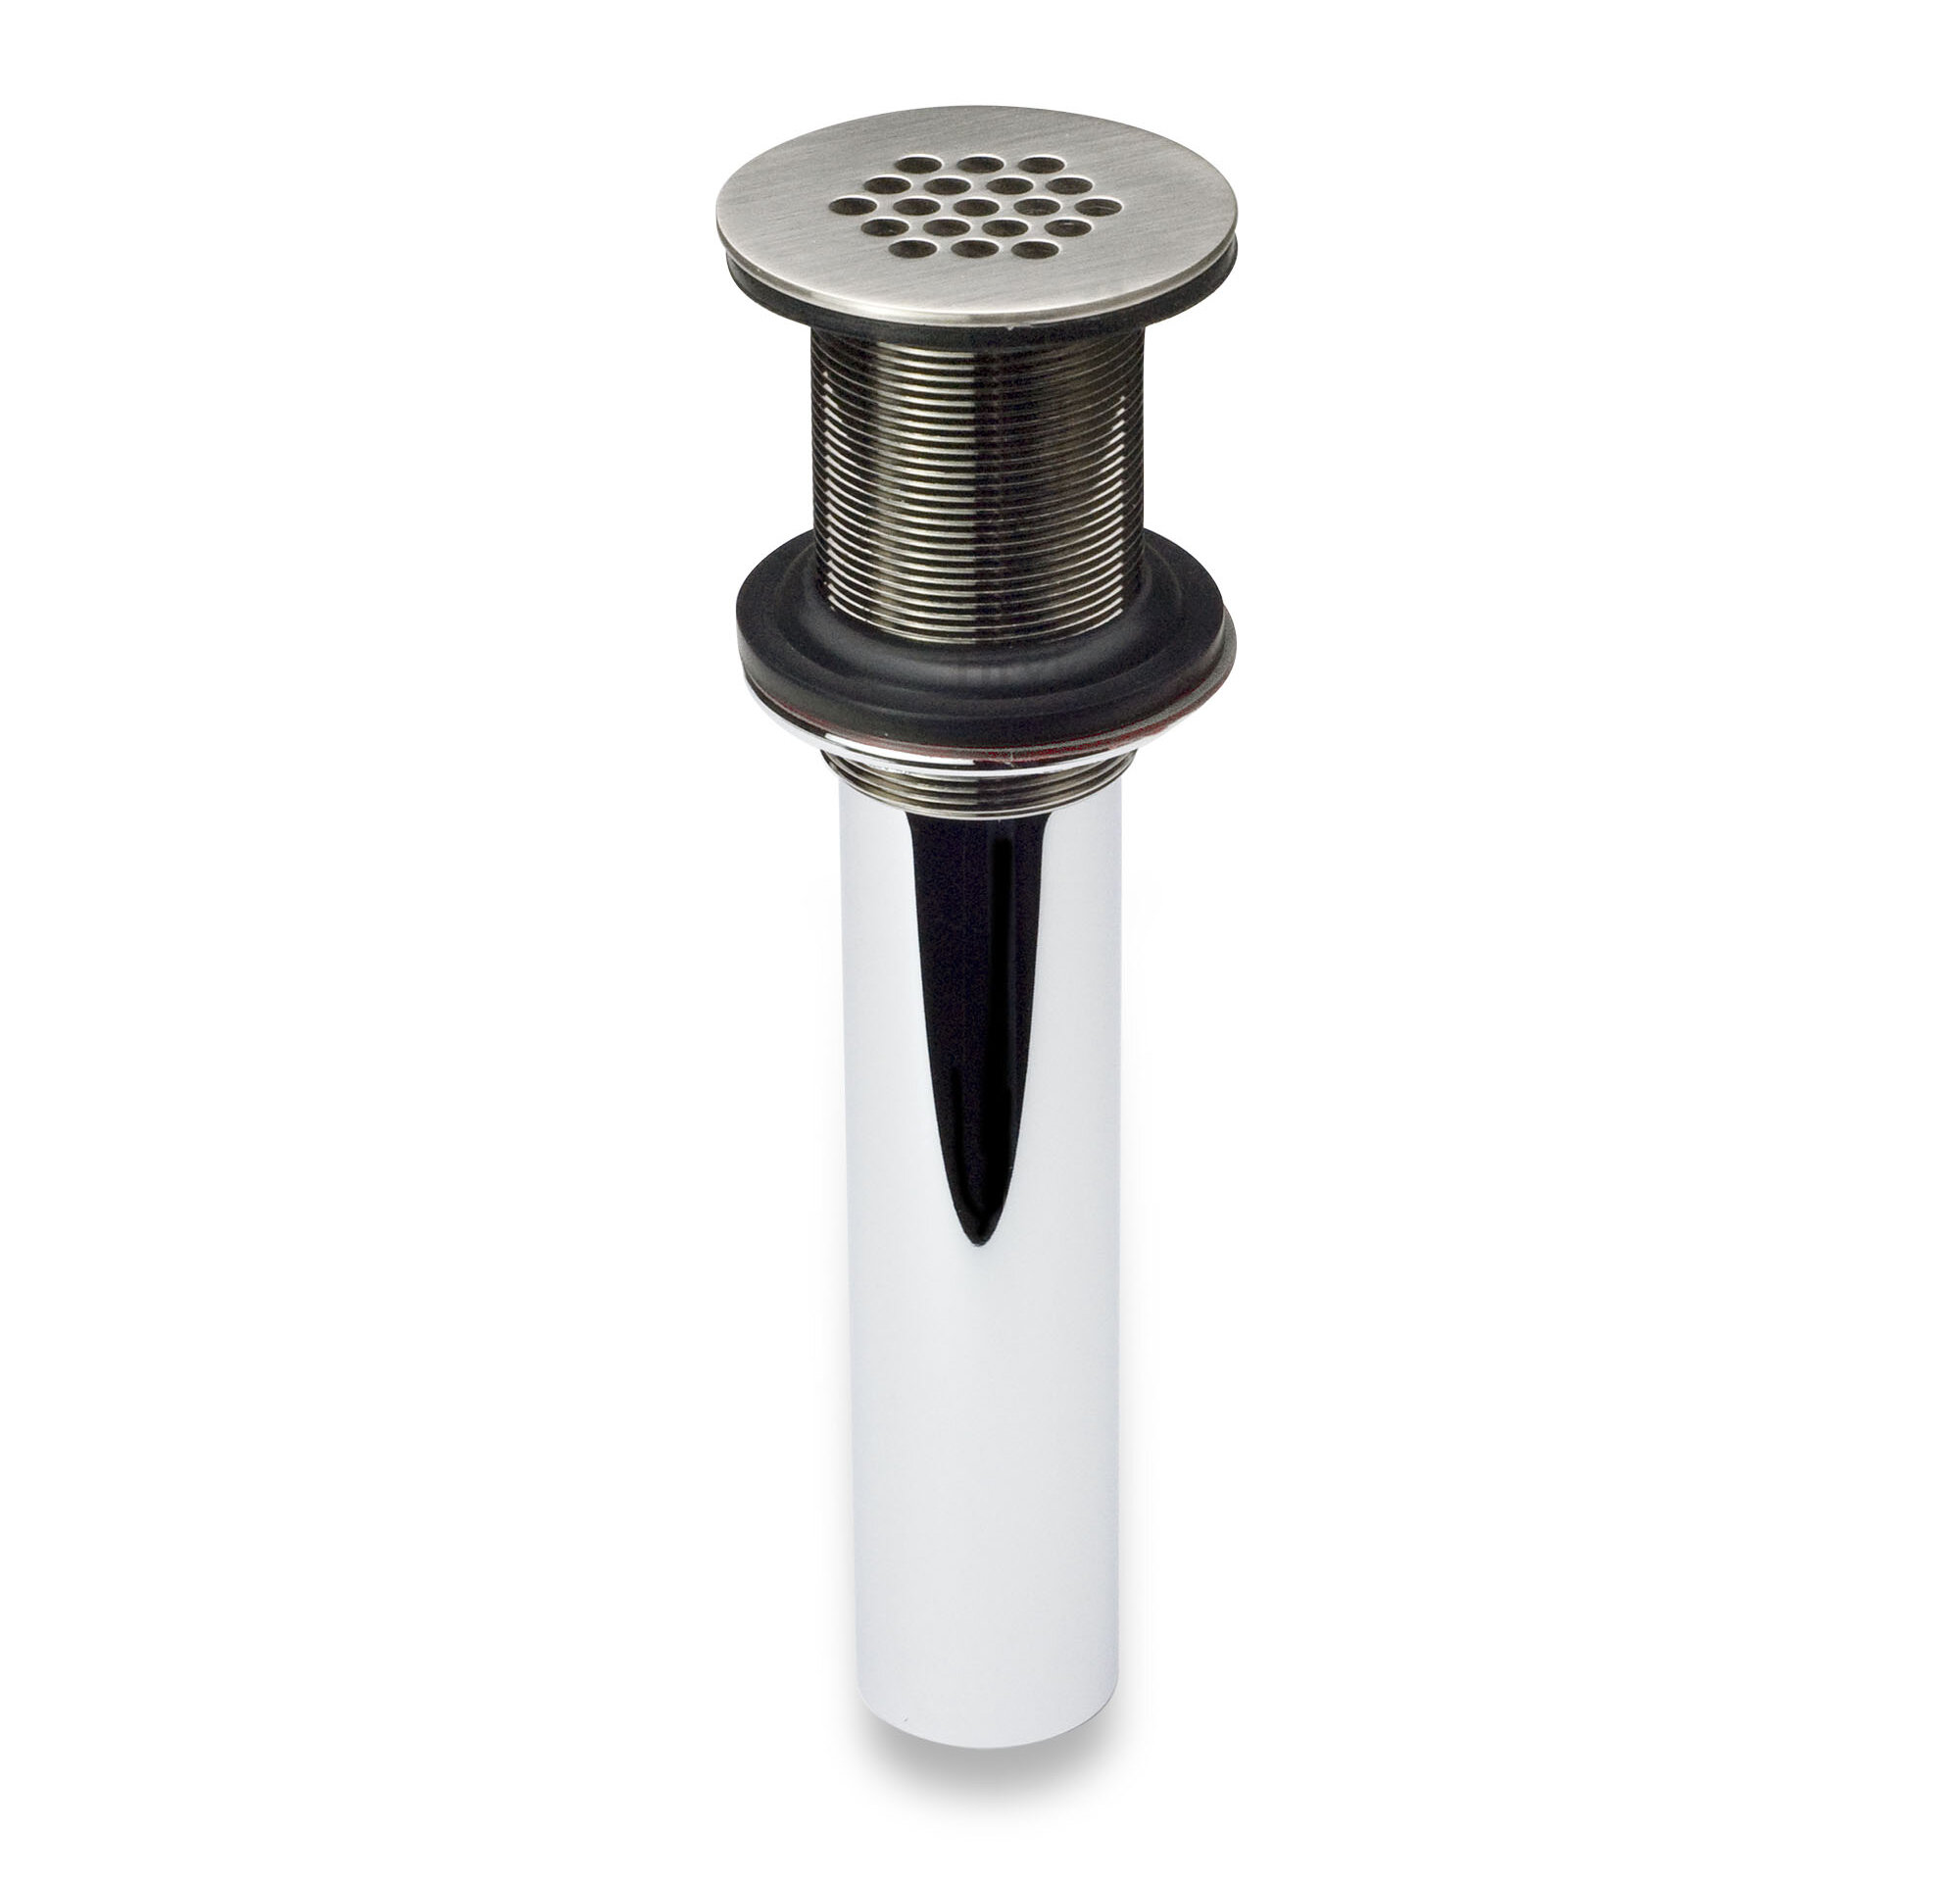 Details about   Sink Pop-Up Waste Pipes Stopper Strainer With Hole Sewer Plug Plumbing Accessory 